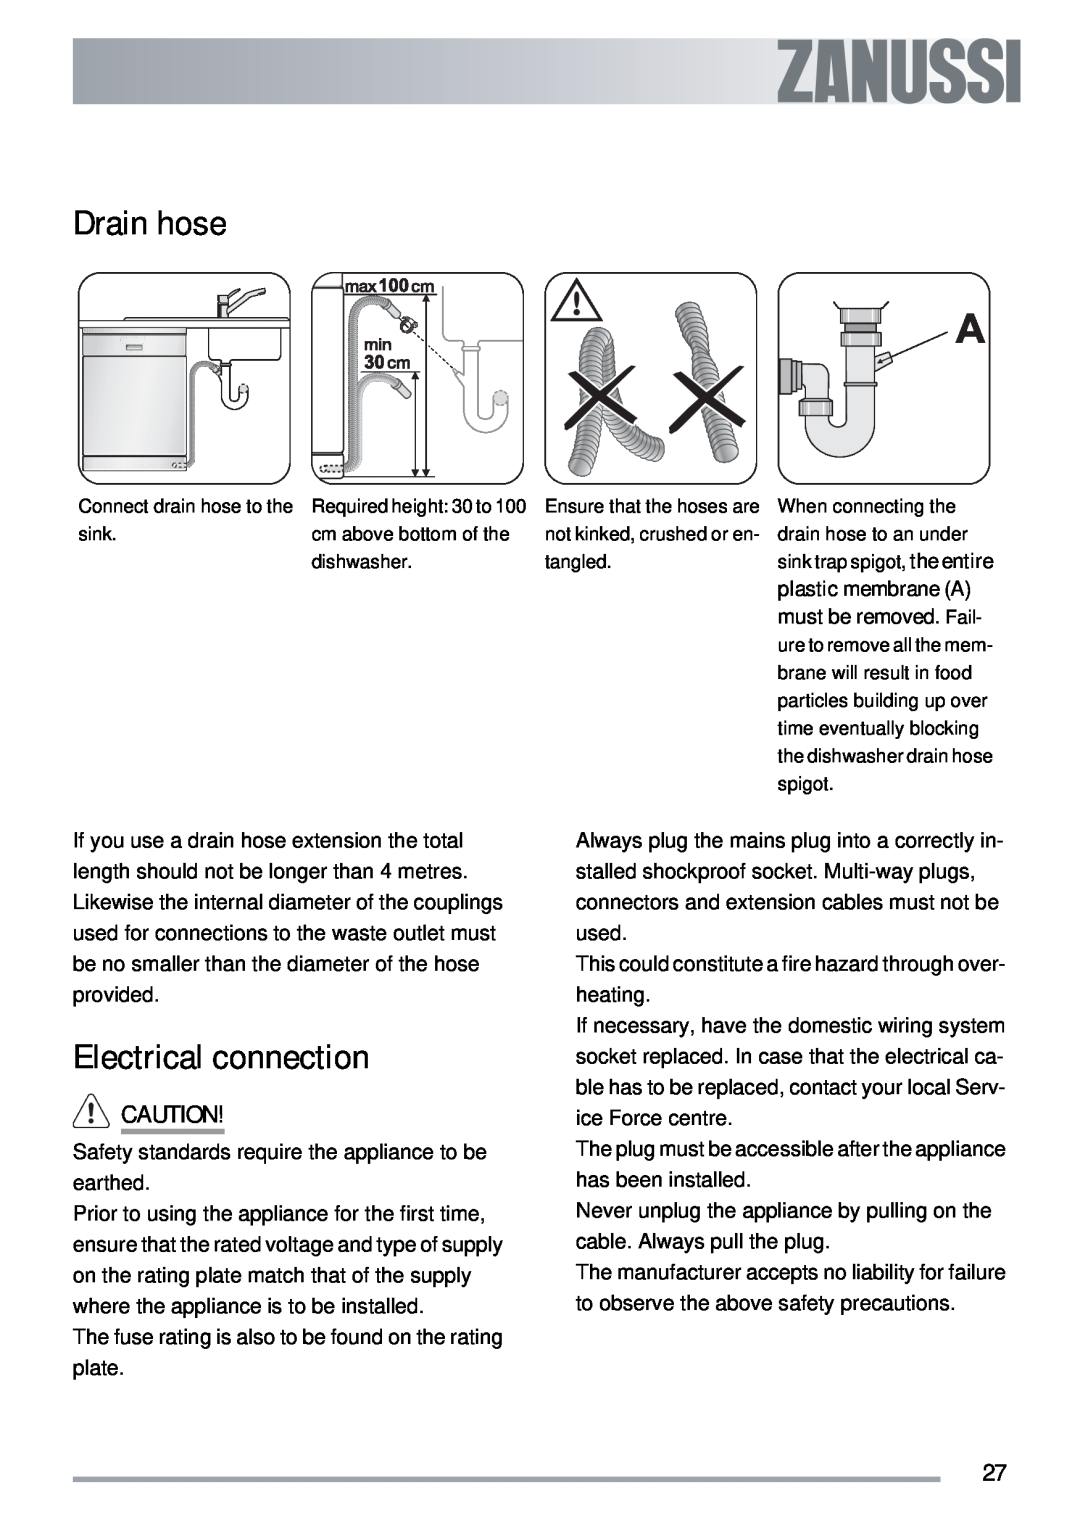 Zanussi ZDT 311 user manual Drain hose, Electrical connection 